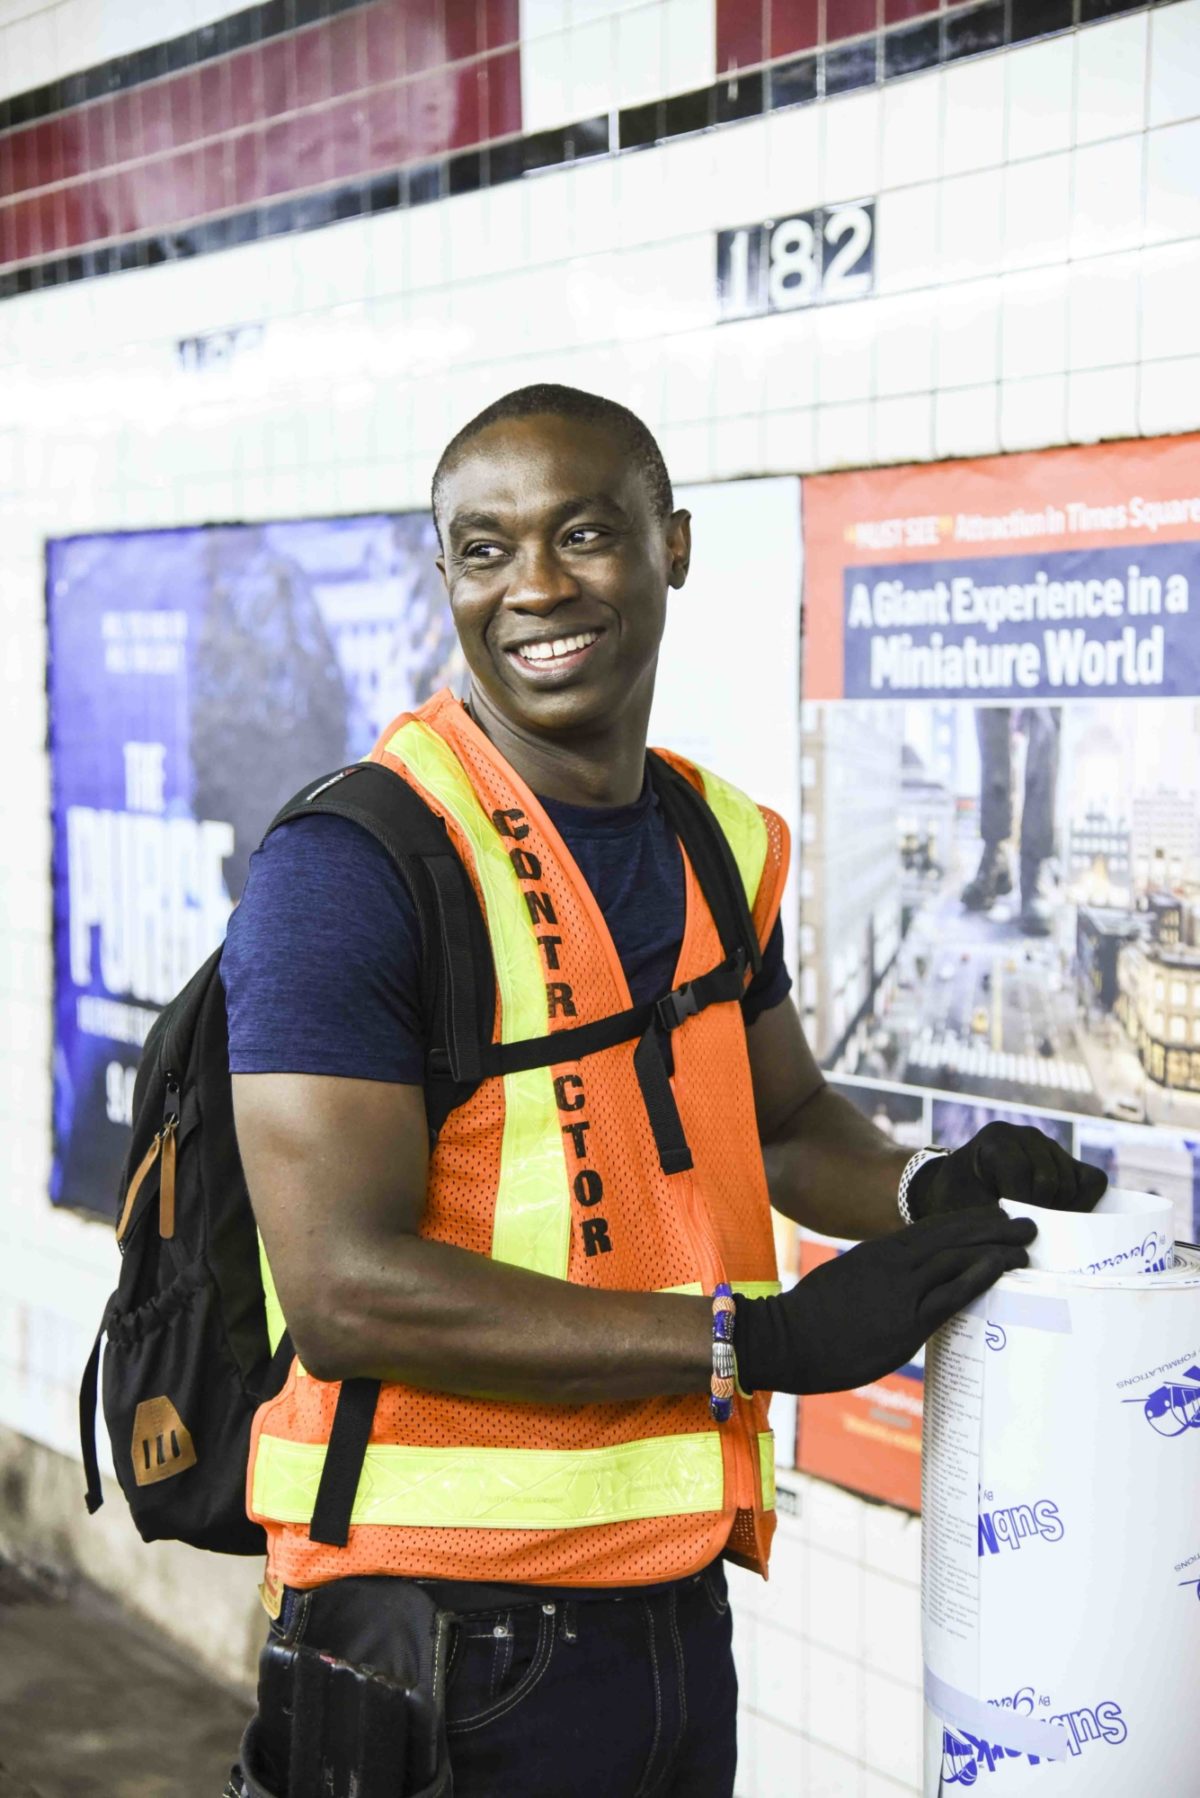 A smiling man wearing a safety best is holding a large roll of poster in a train station.